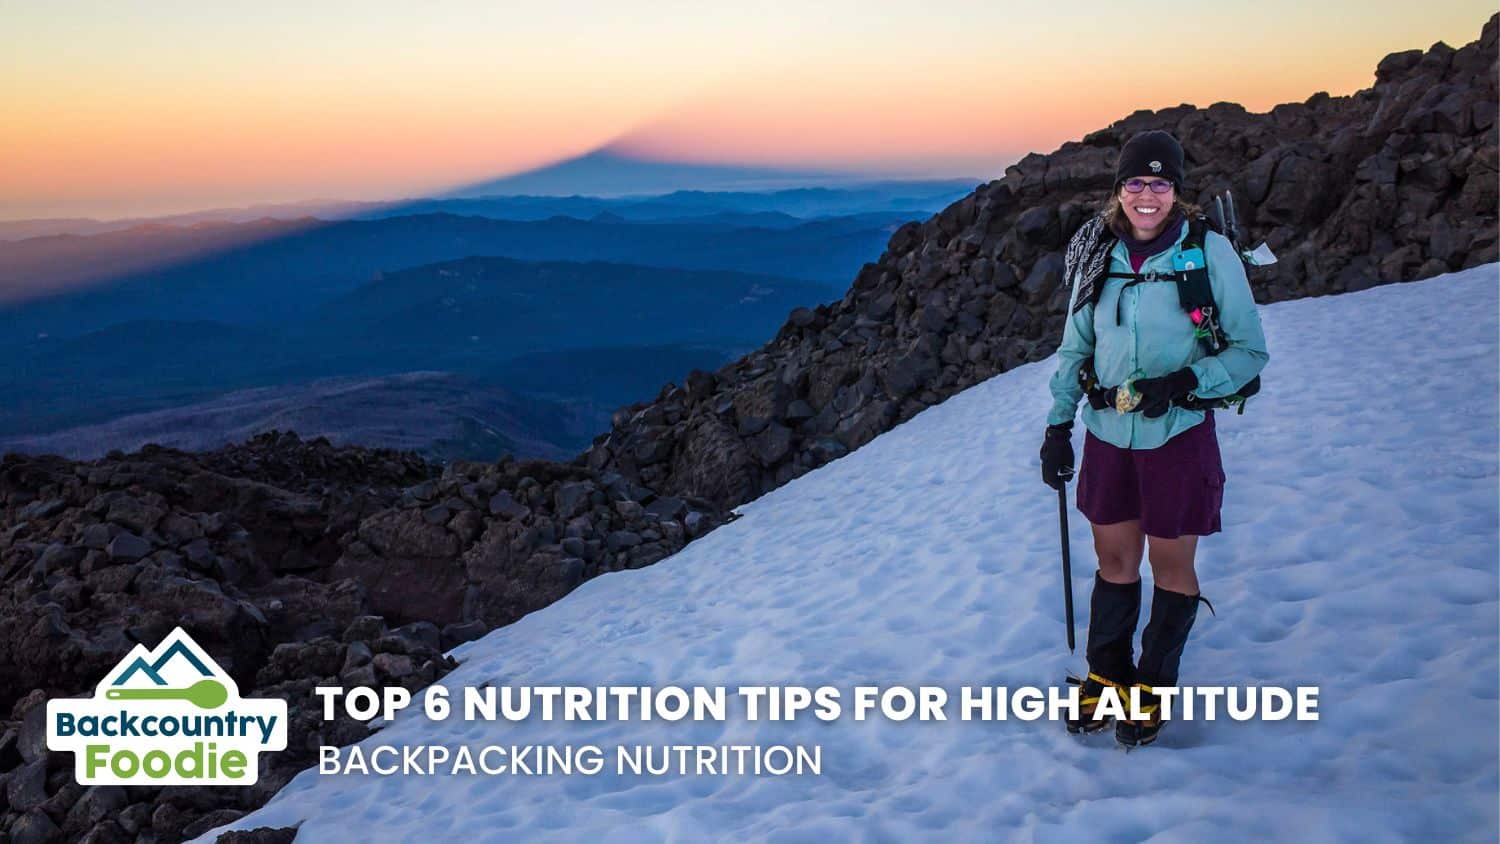 Backcountry Foodie Blog Top 6 Nutrition Tips for High Altitude Backpacking Nutrition blog